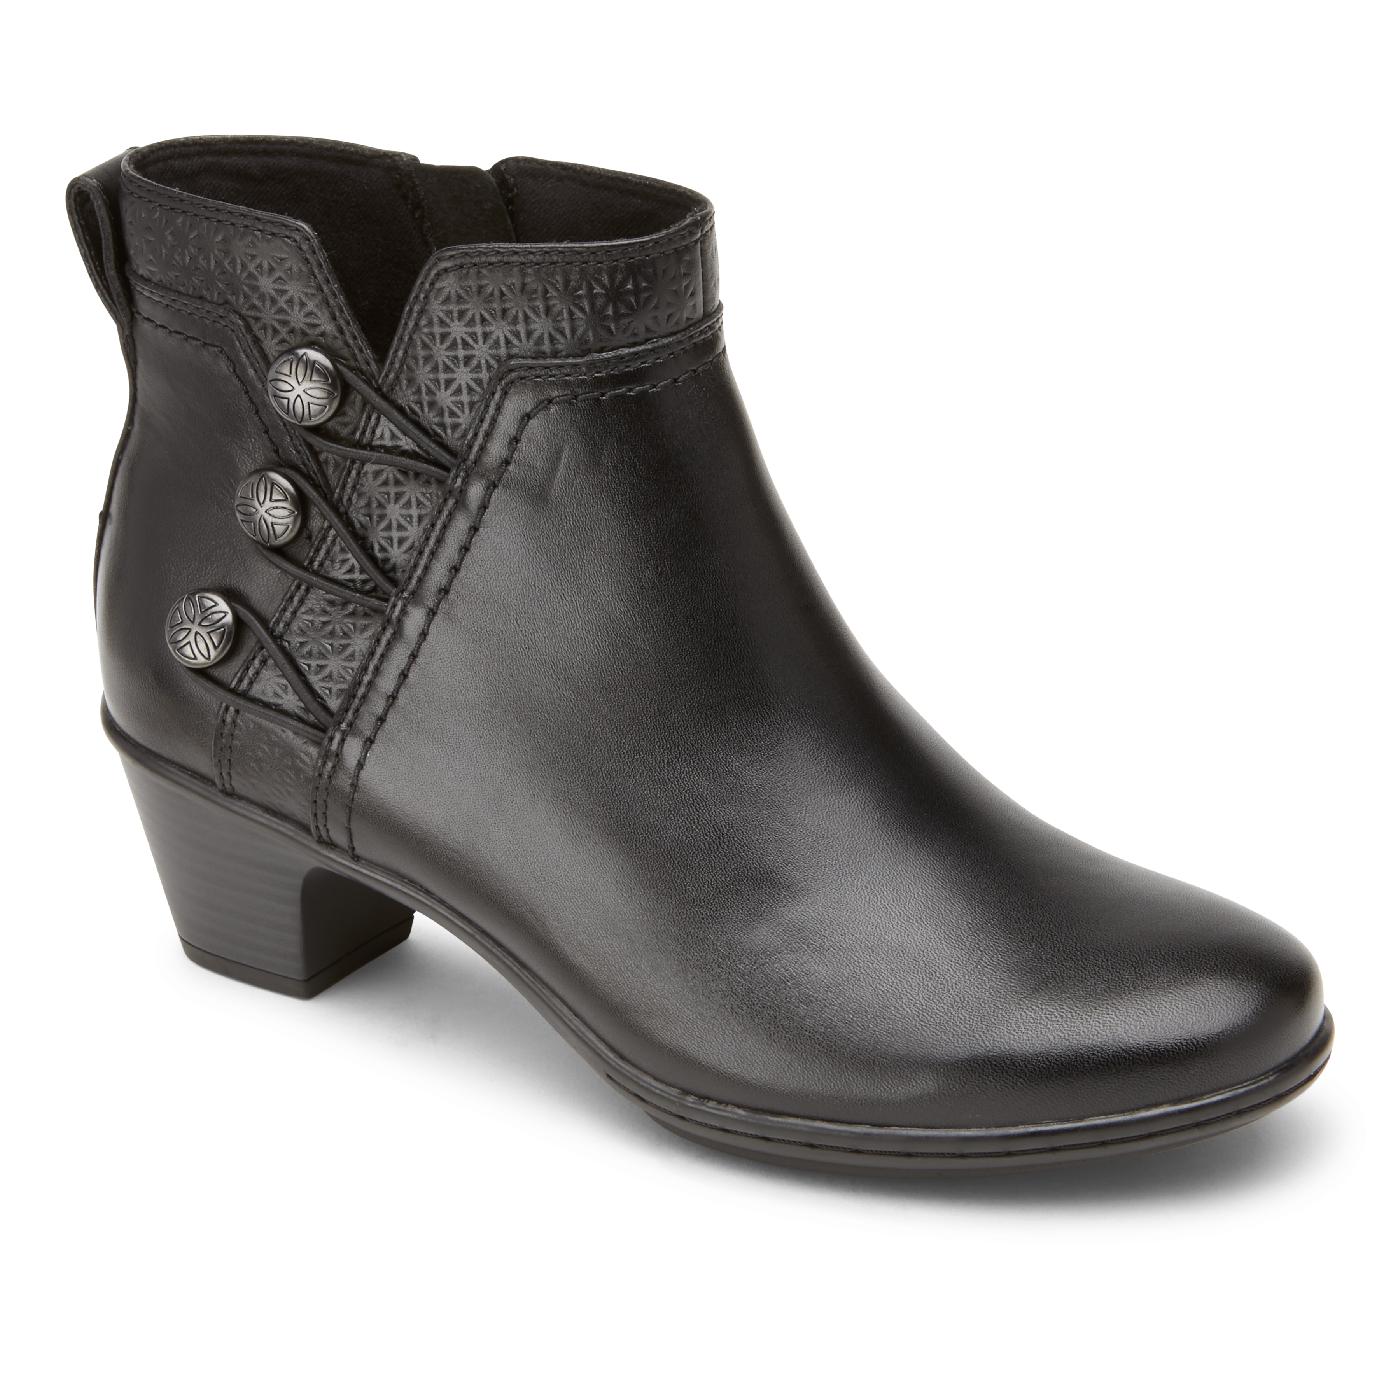 Rockport Leather Women's Cobb Hill Kailyn Ankle Boot in Black - Lyst